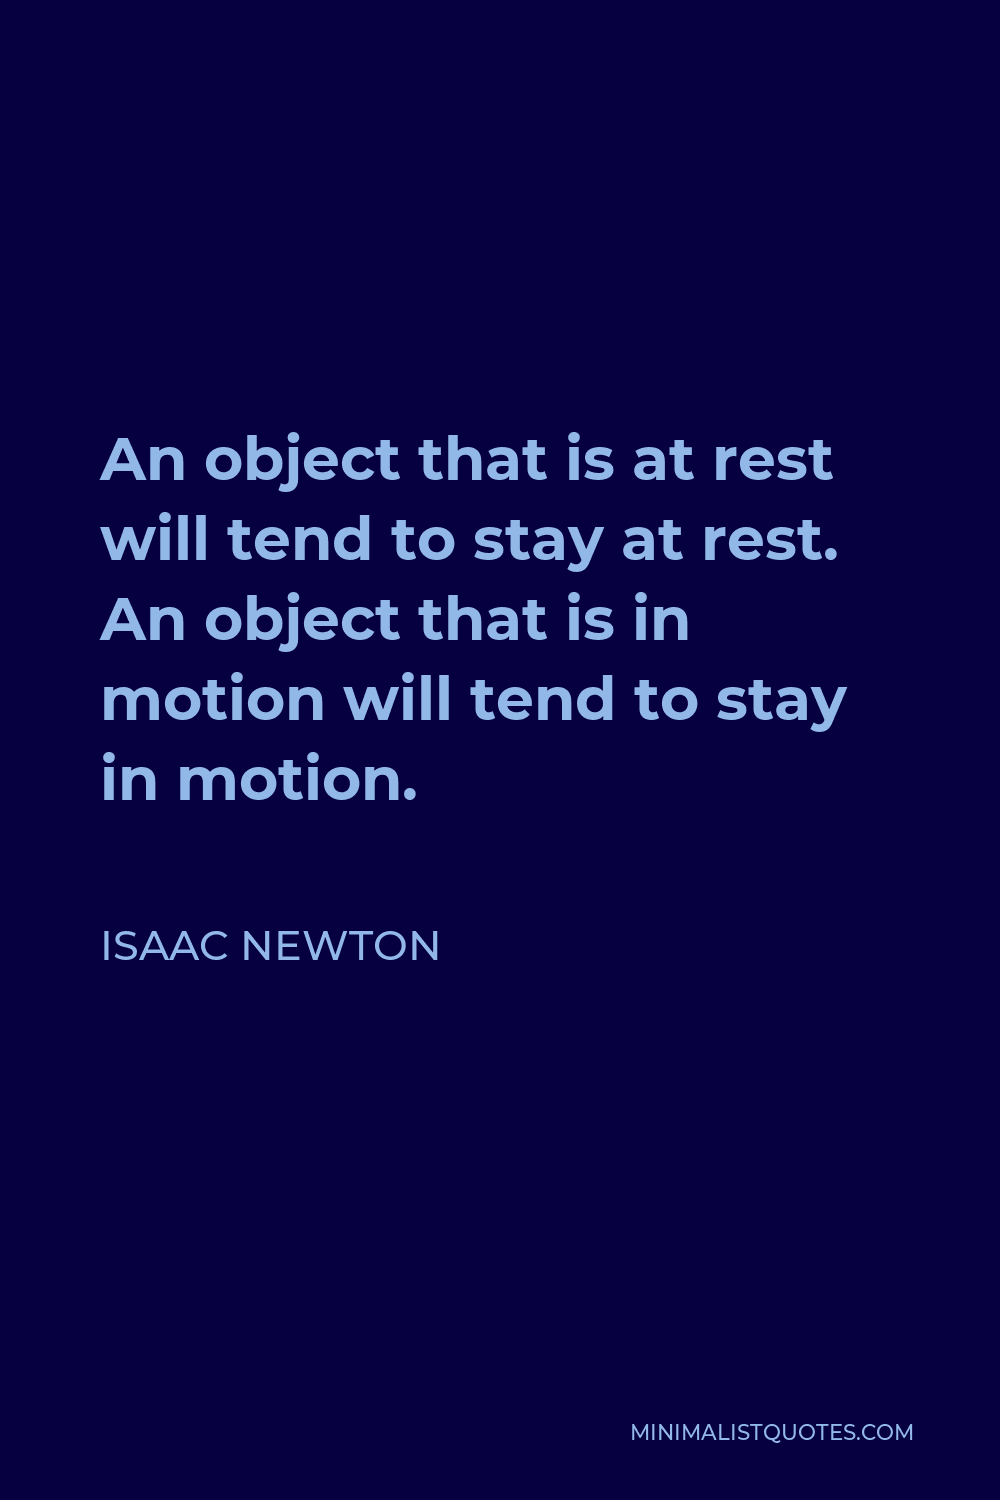 Isaac Newton Quote - An object that is at rest will tend to stay at rest. An object that is in motion will tend to stay in motion.